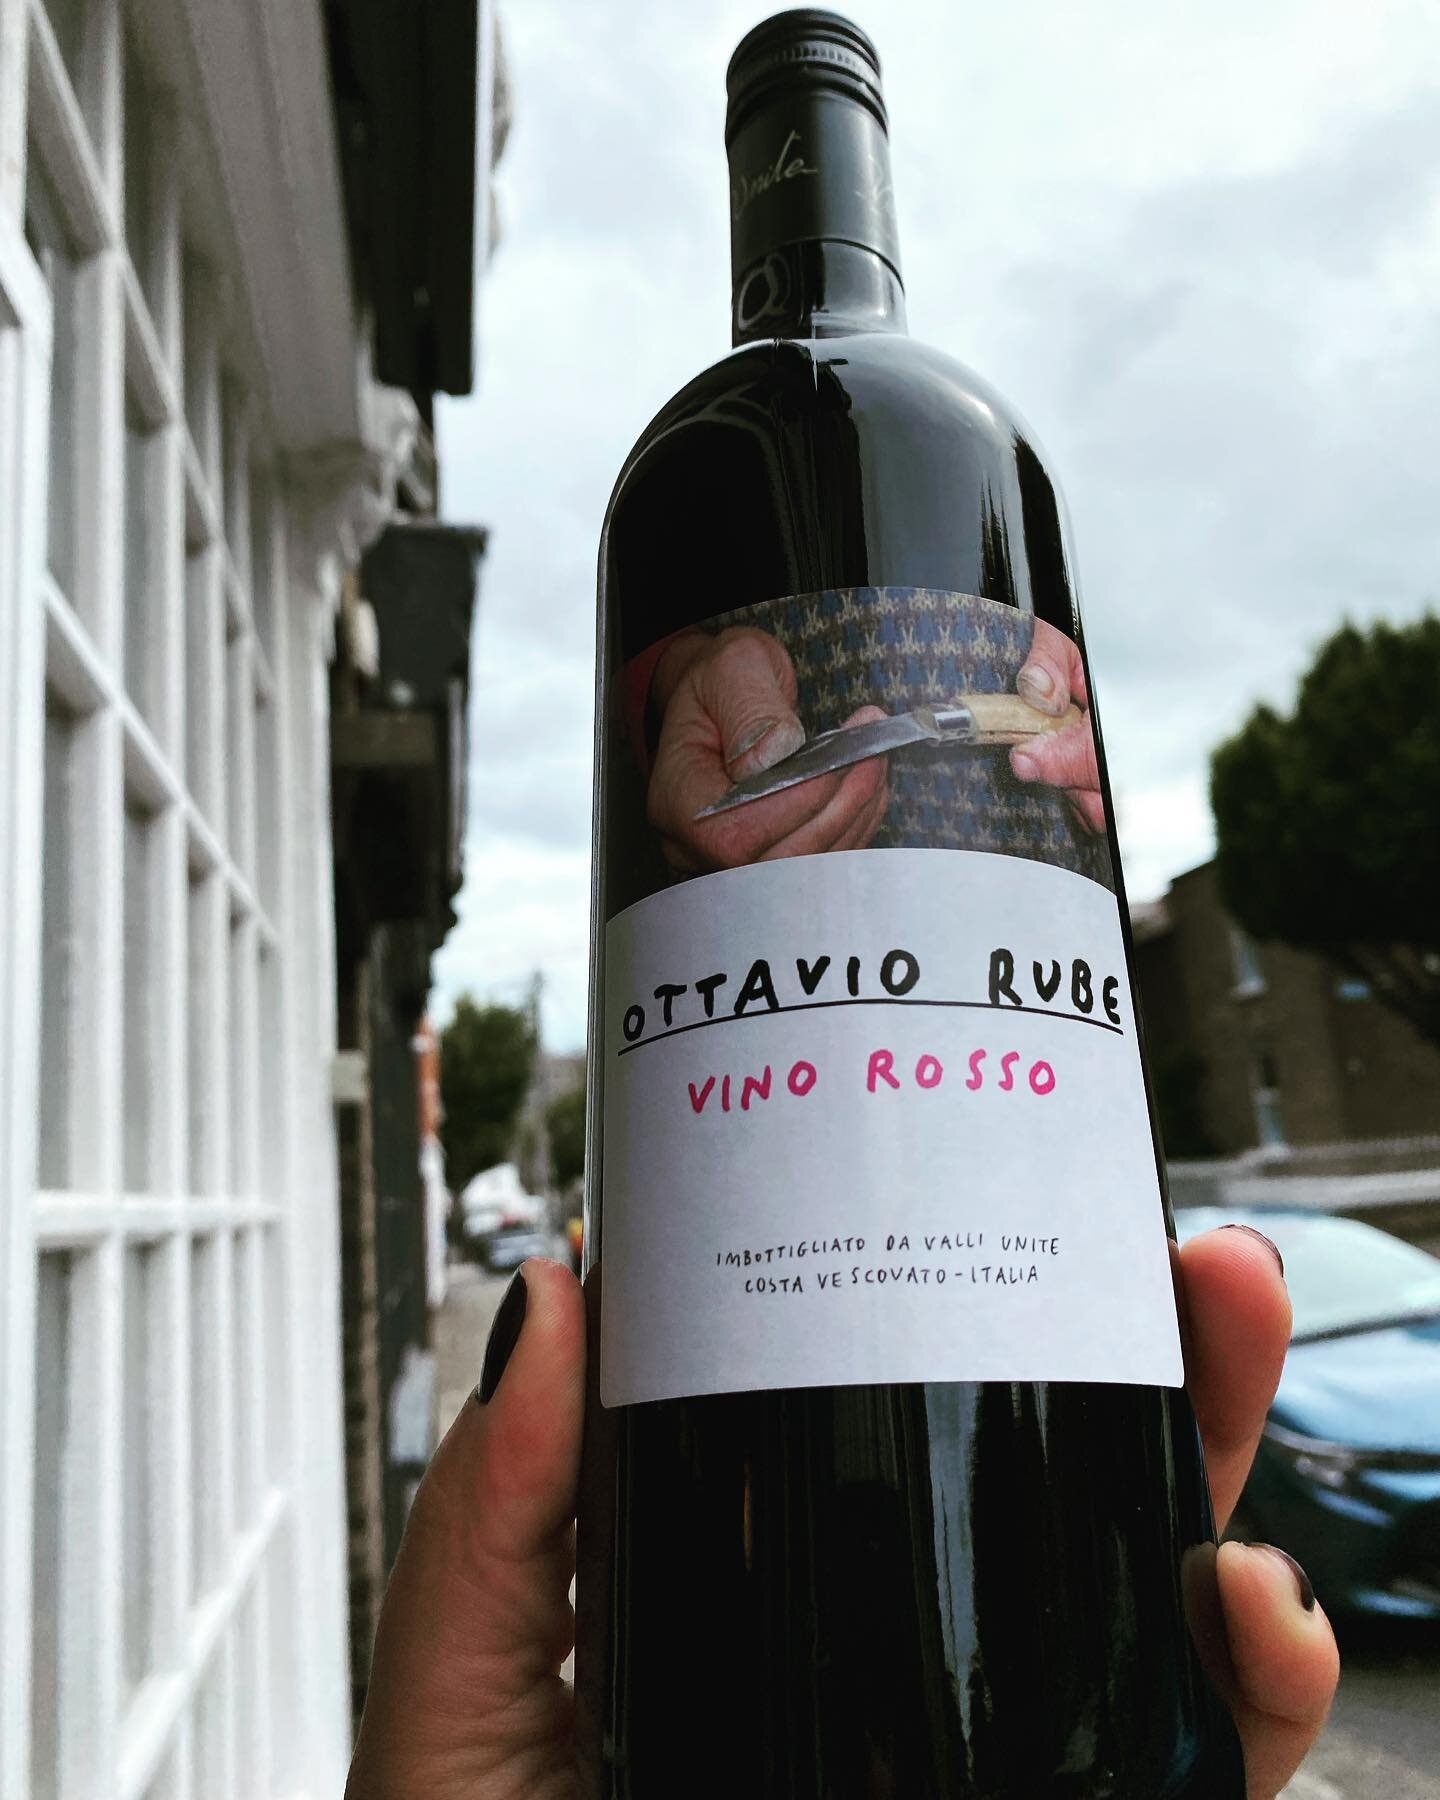 It is back in store! 😊 Bright fresh fruit nose, red cherry, light-to-medium bodied. Nice grip and savoury flavours on a palate structured by refreshing acidity.
Open 8 - 8 pm.  #organicwine #redwine #organicredwine #shoplocal #smallbusiness #wednesd